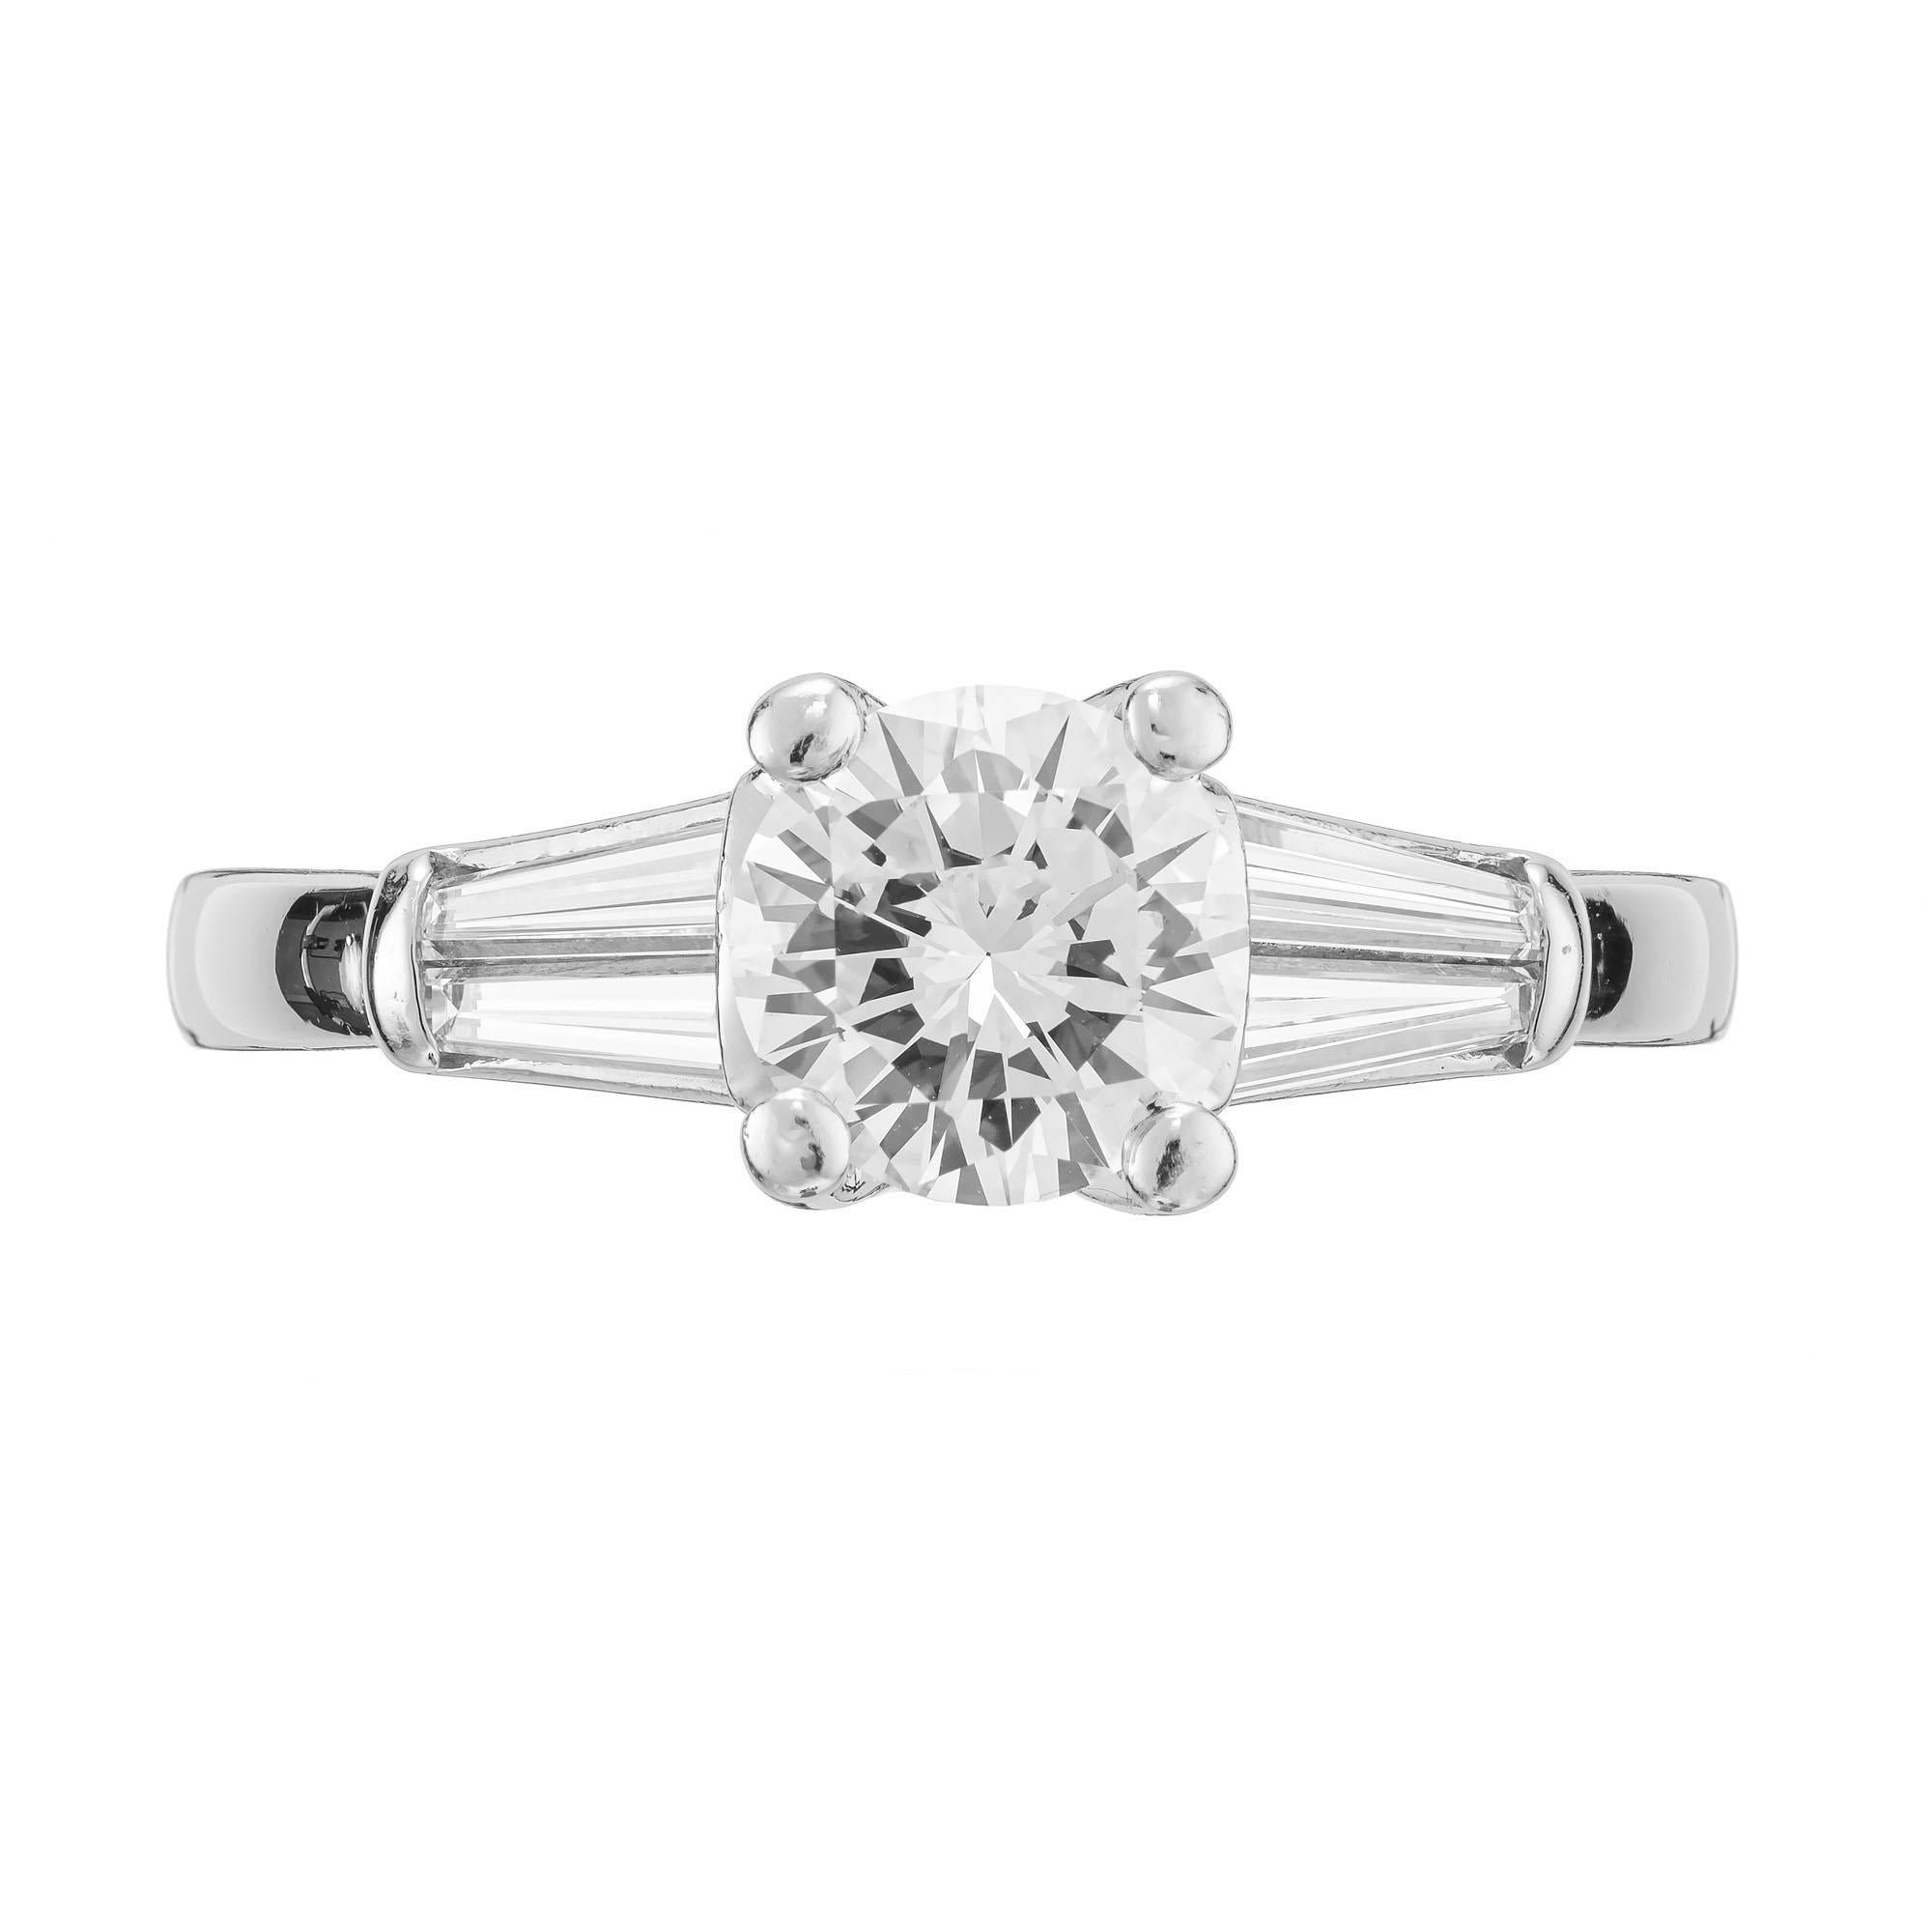 Martin Flyer 1940's diamond engagement ring. GIA certified round brilliant cut center stone with 4 tapered baguette side diamonds in a platinum setting. Exceptional brilliance. The cutting is to the standards of the 1940's transitional with more